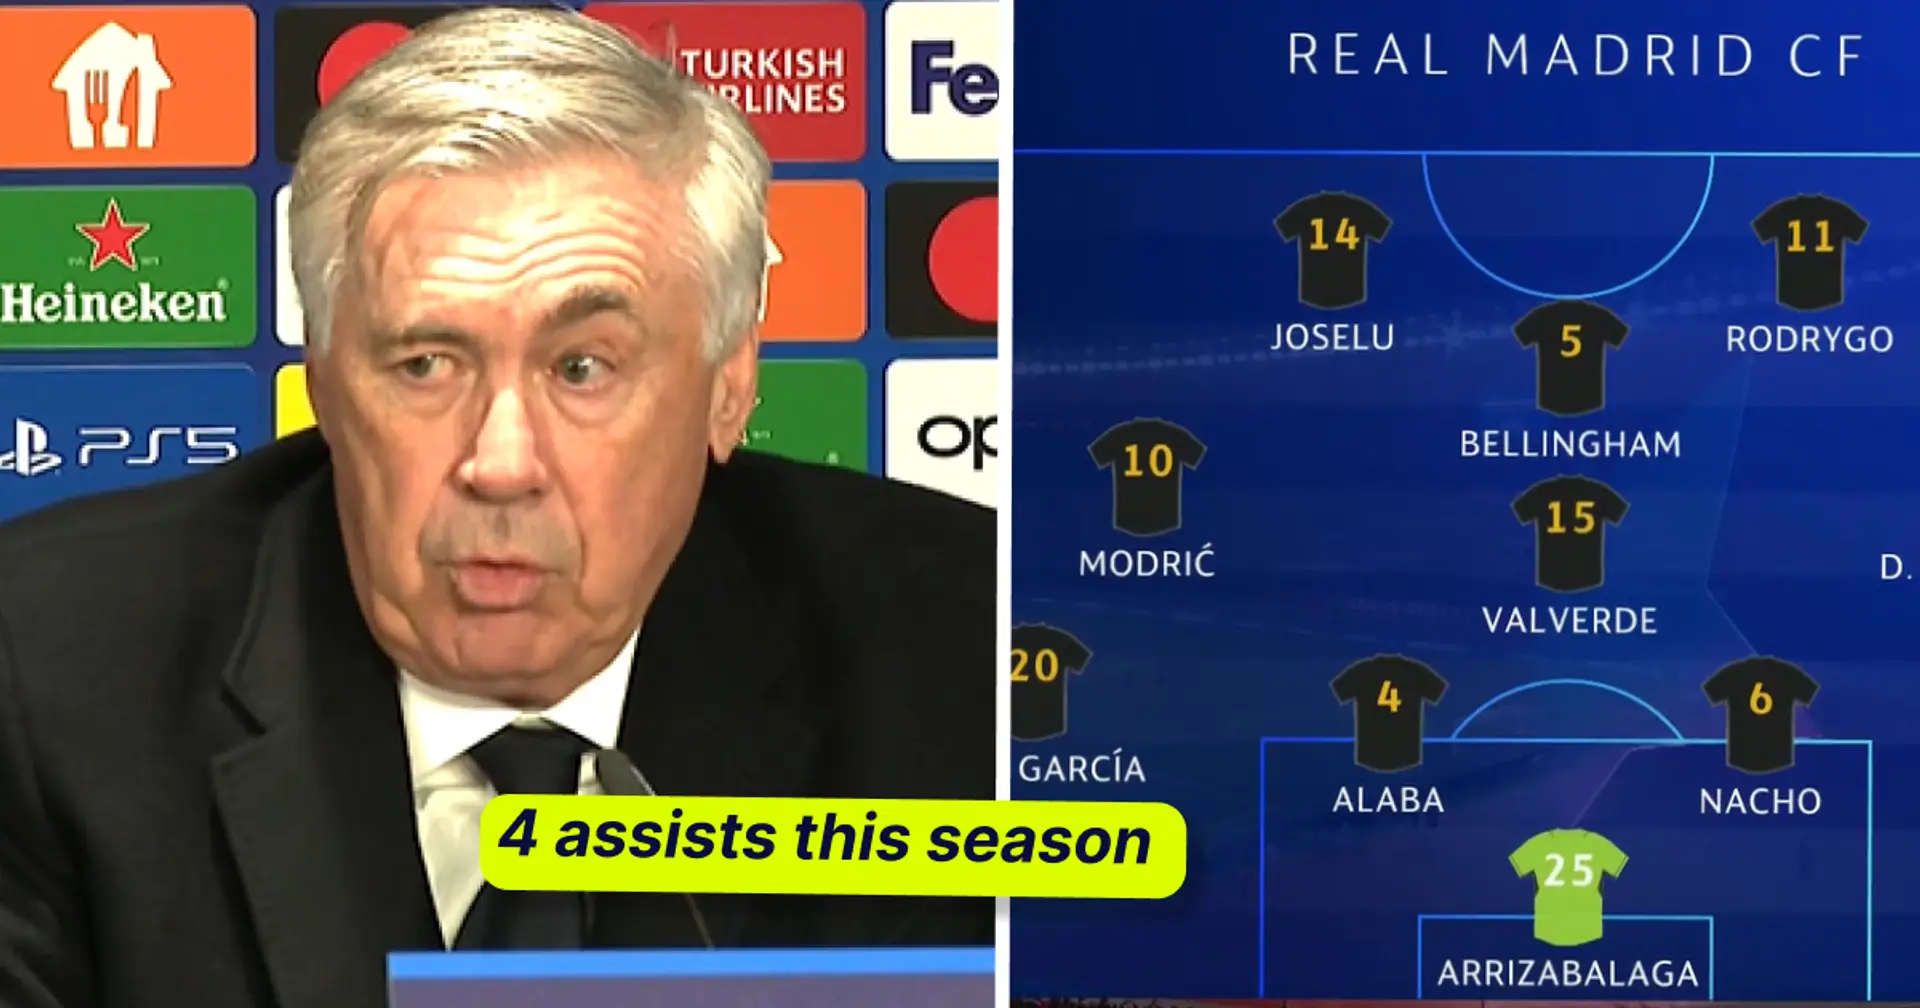 Madridistas can't understand why Ancelotti keeps benching one player despite fine displays